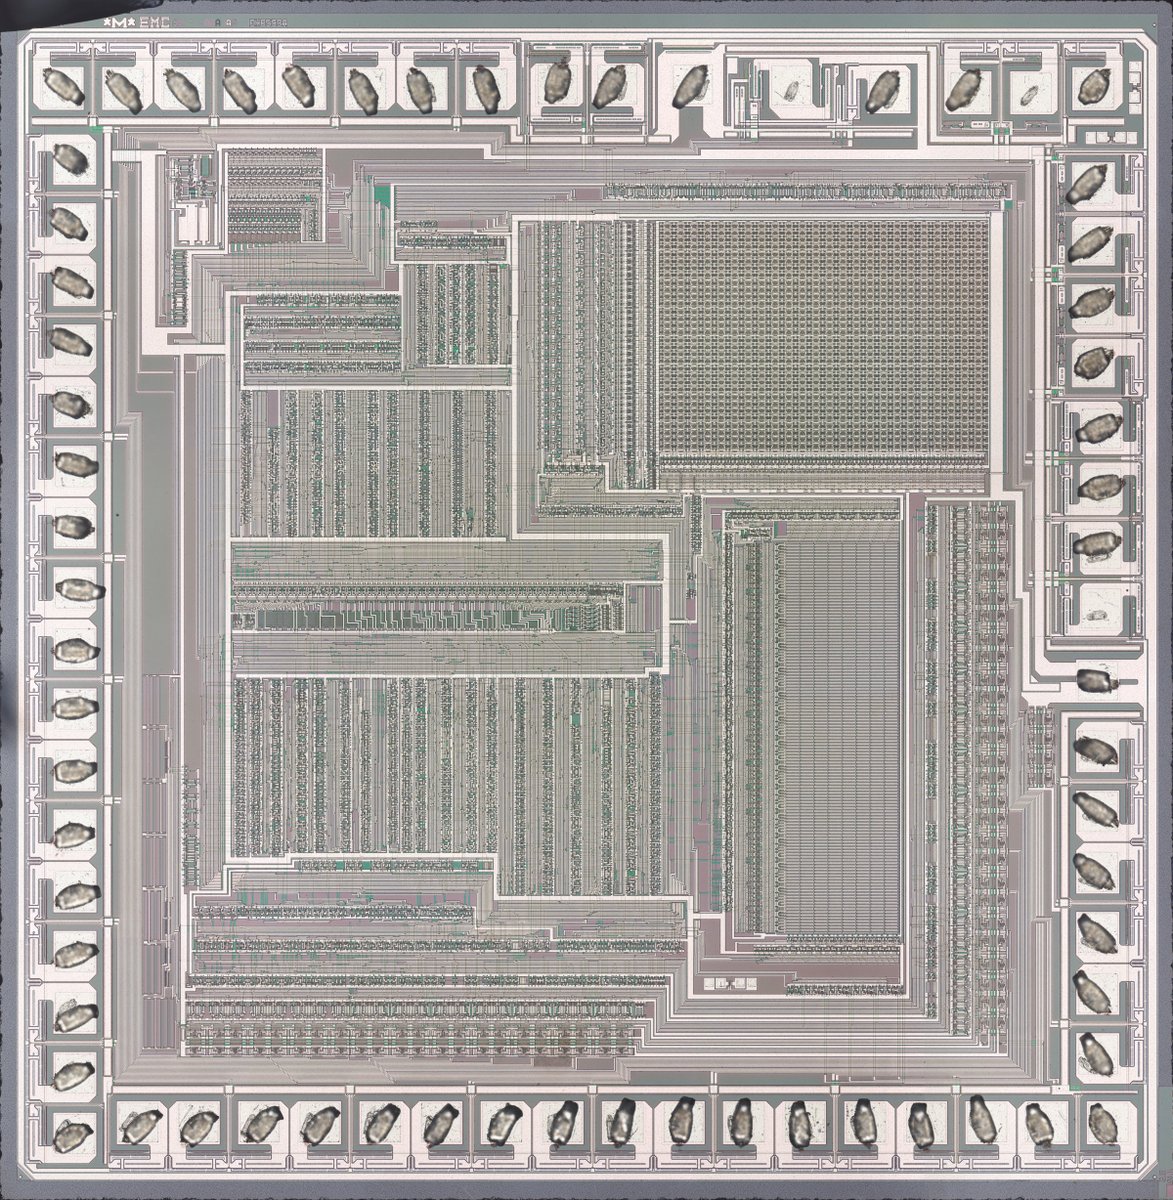 Decapsulated microcontroller (EMC EH8599) from Talking Brick Game 97 in 1 (E-97T). Chip from the same family as used in 8-in-1 Mini Pets (x.com/onebitonepixel…).
Full res: commons.wikimedia.org/wiki/File:EMC_…